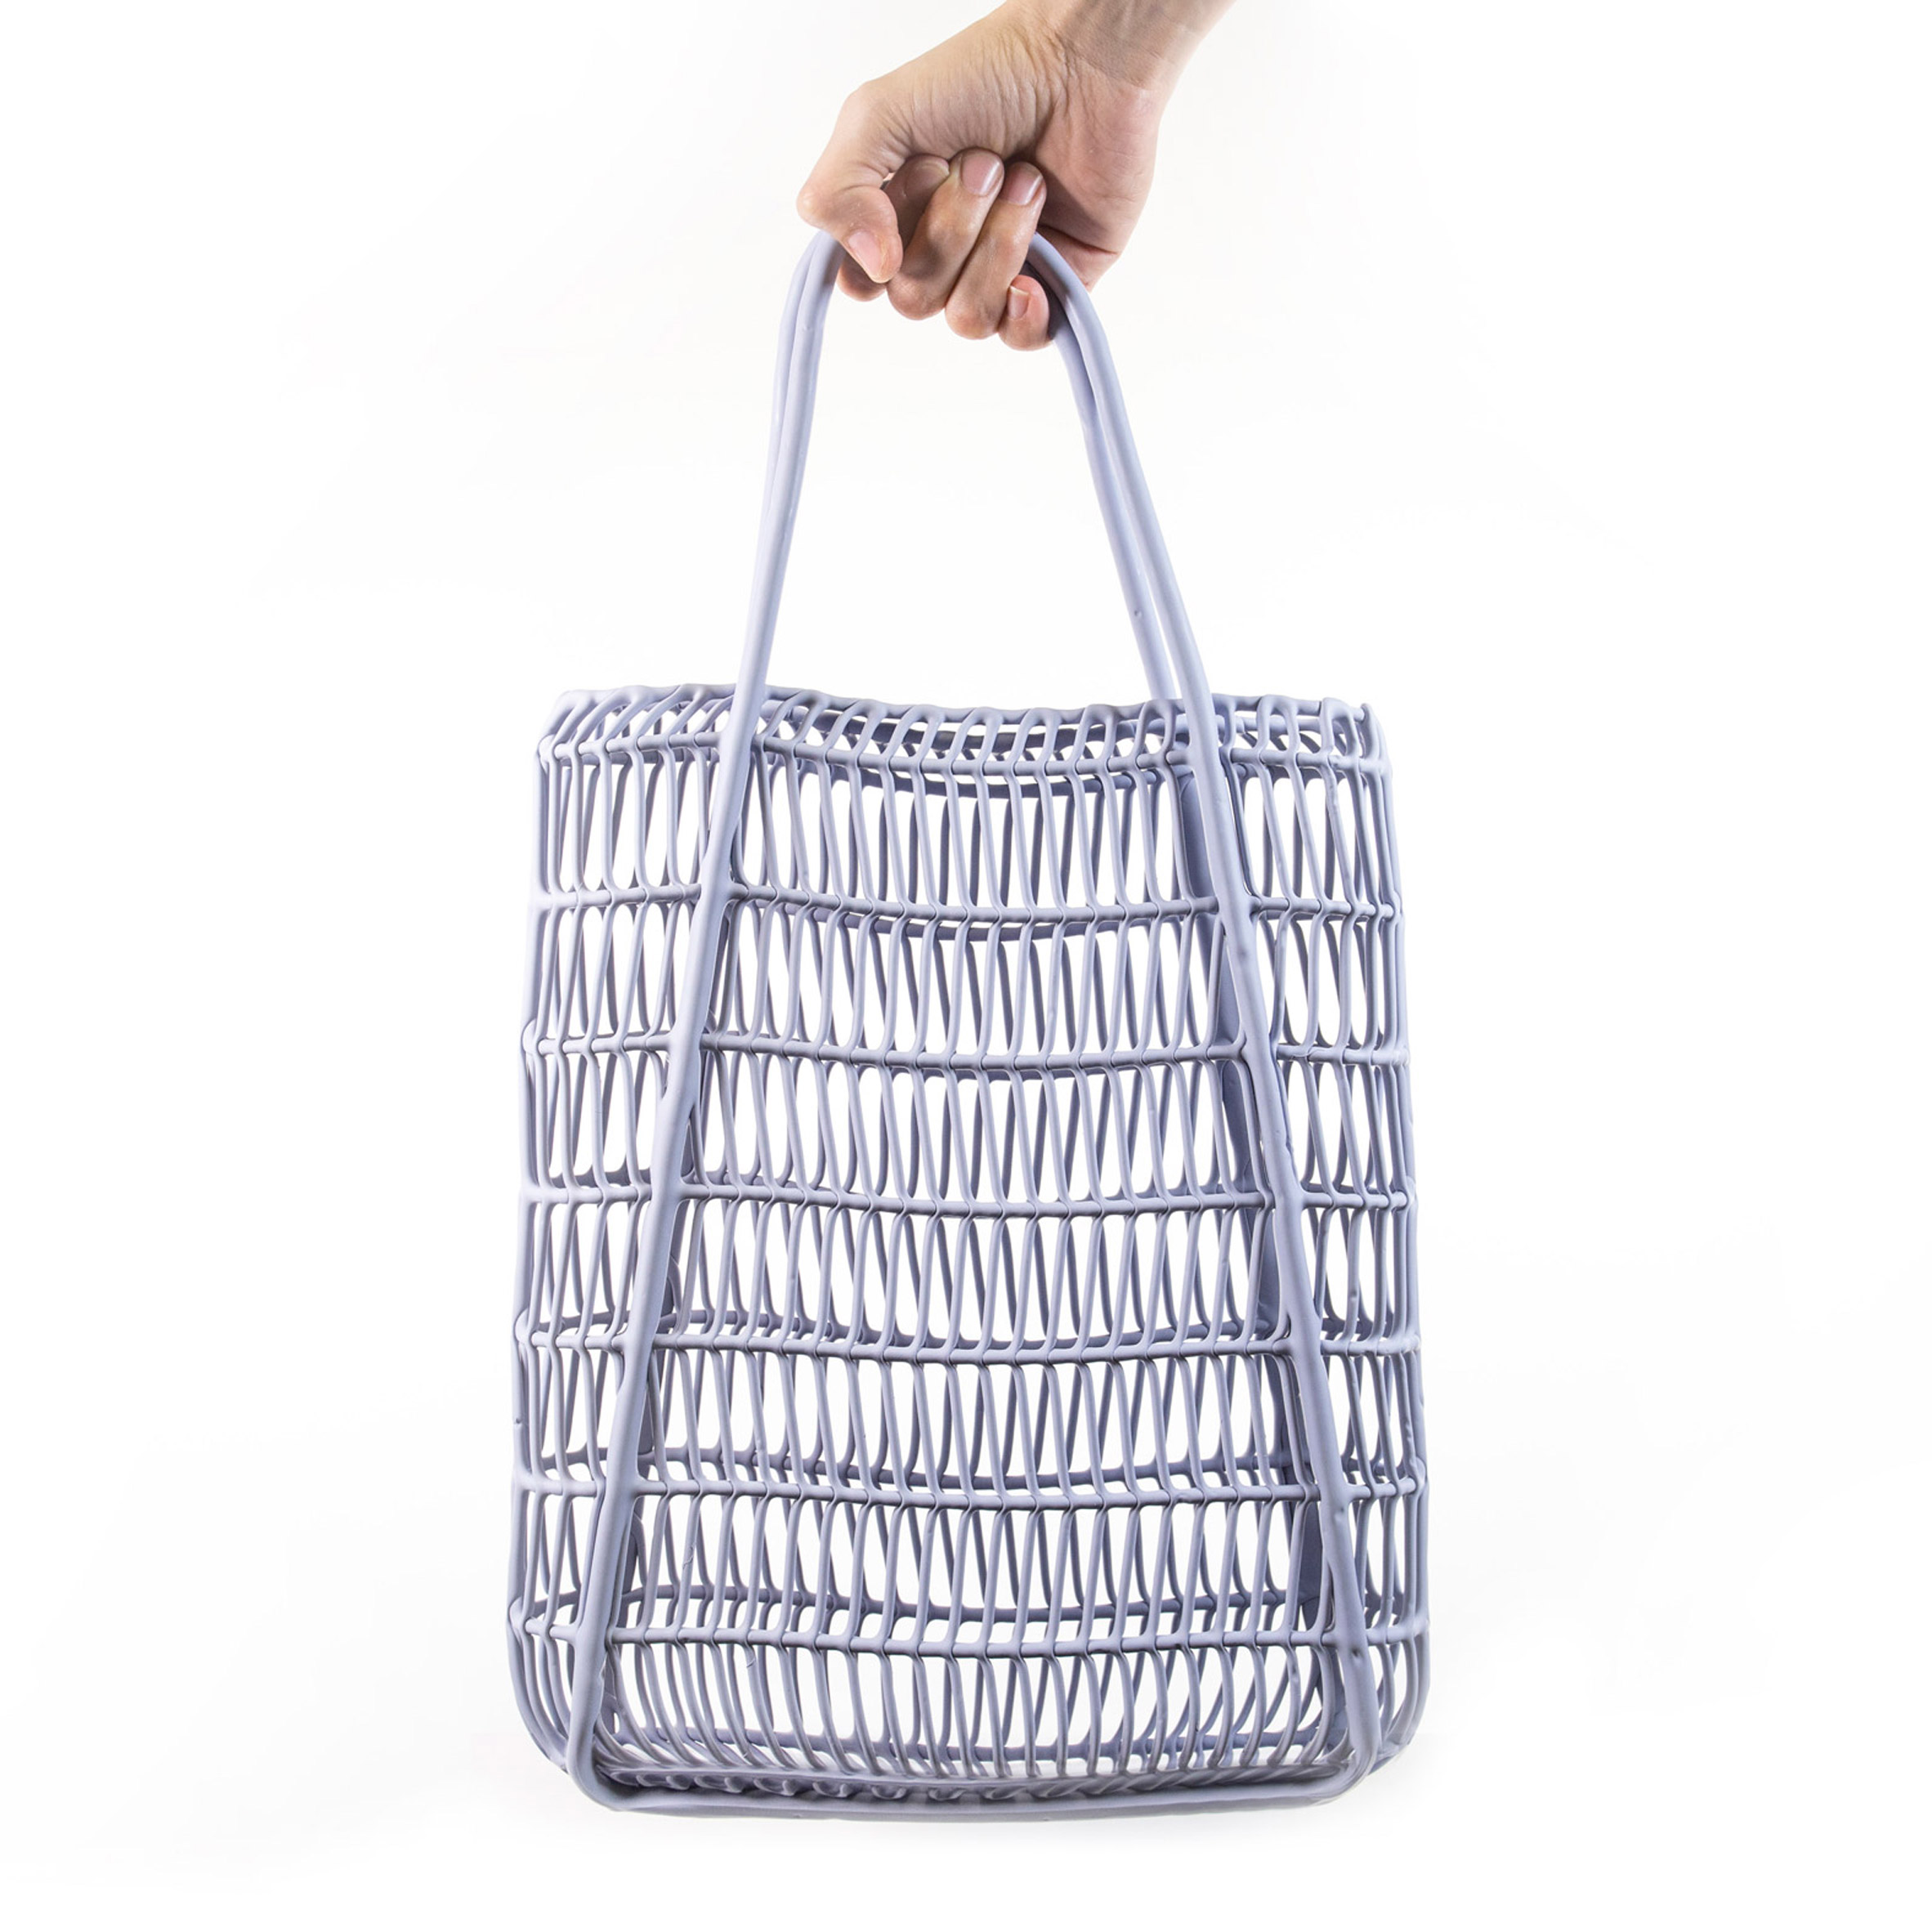 via charter Møde MIT Self-Assembly Lab prints bags and lamps in minutes at Design Miami